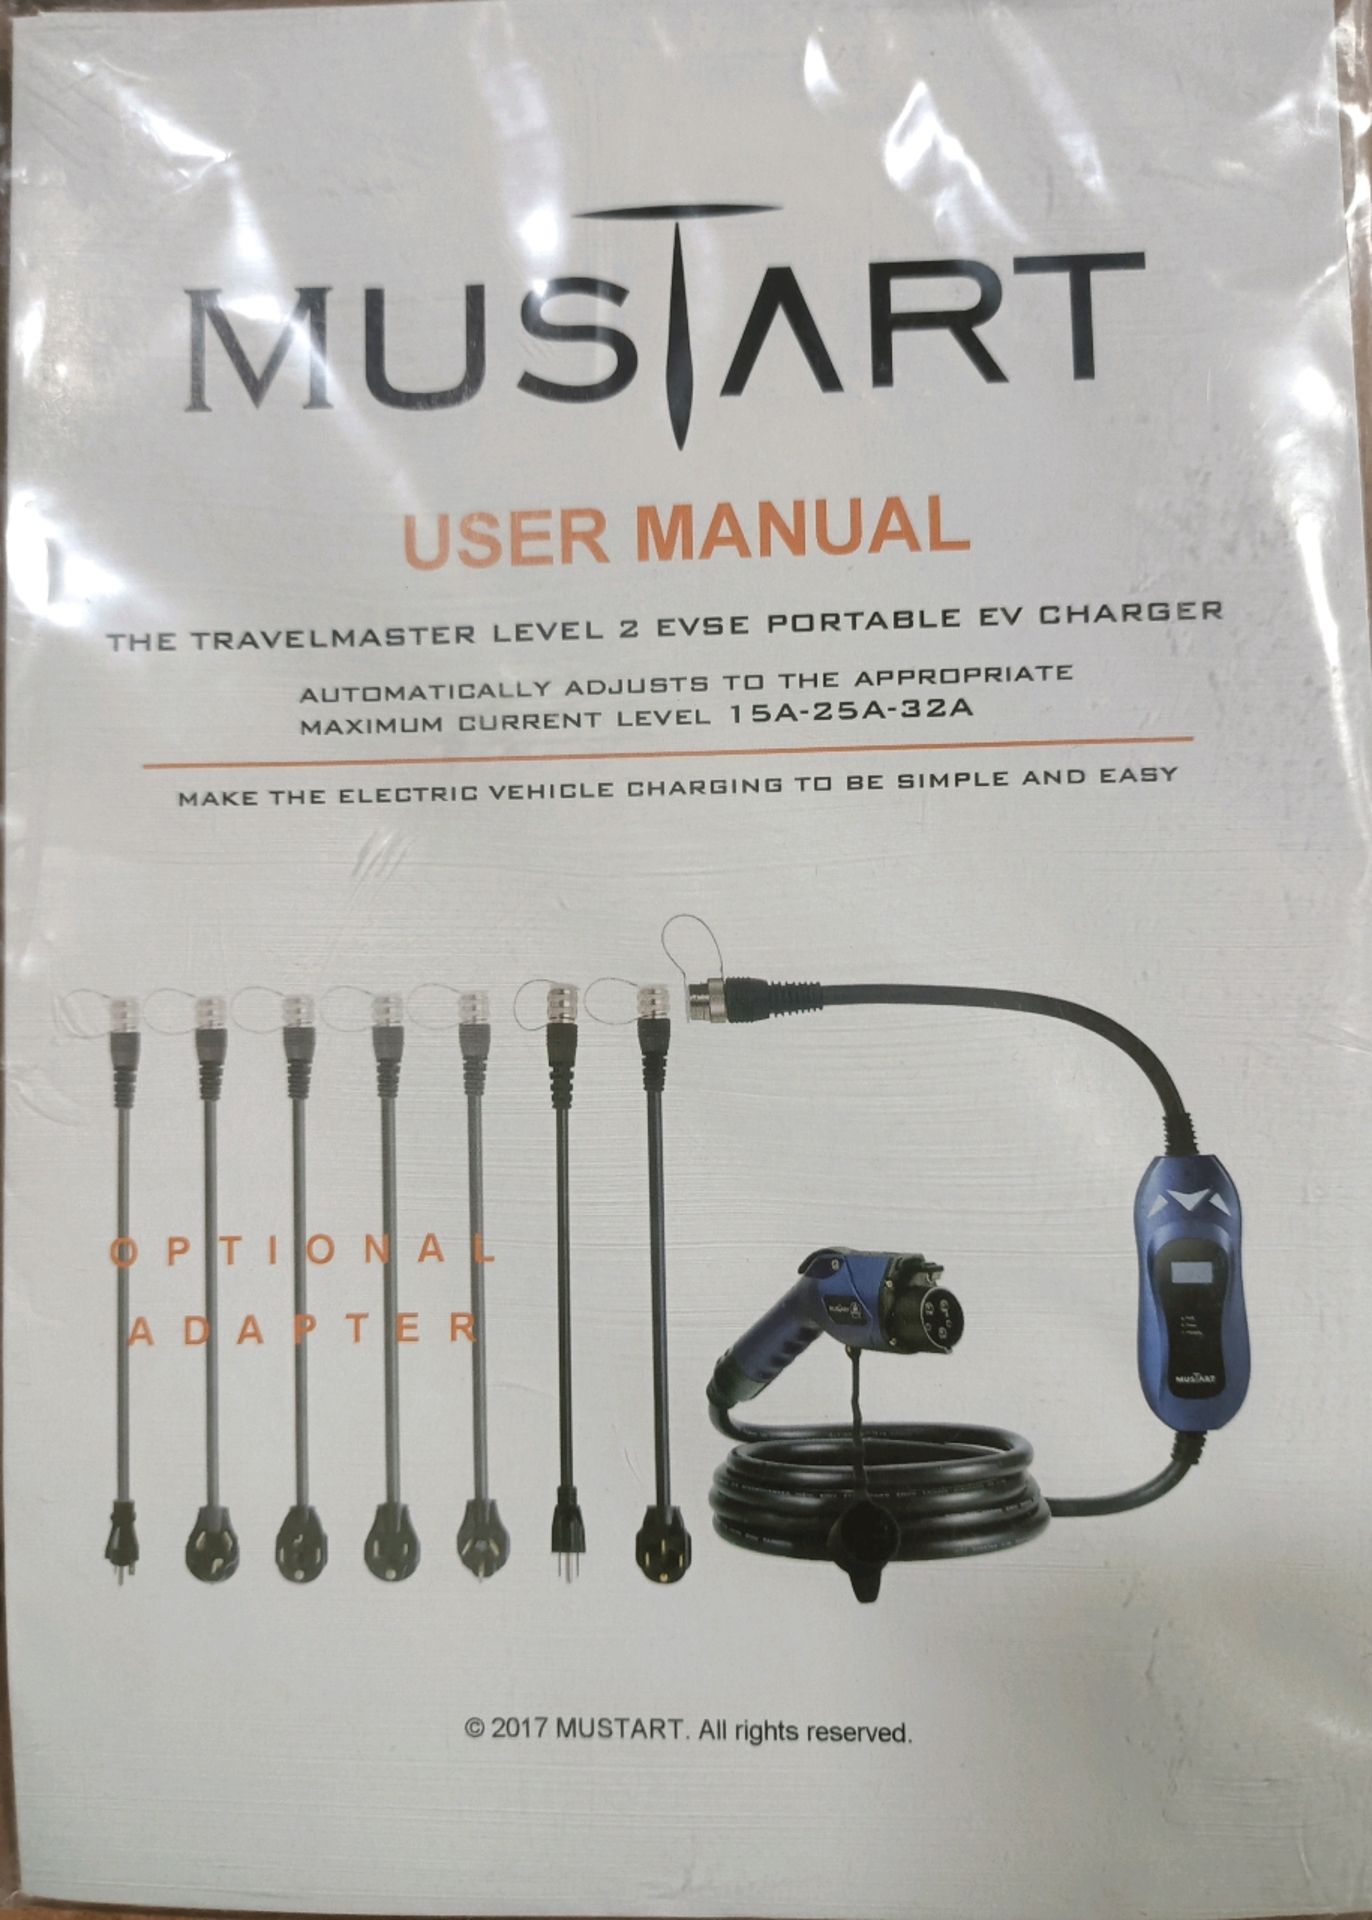 Mustart Portable Level 2 Chargers - Image 2 of 4